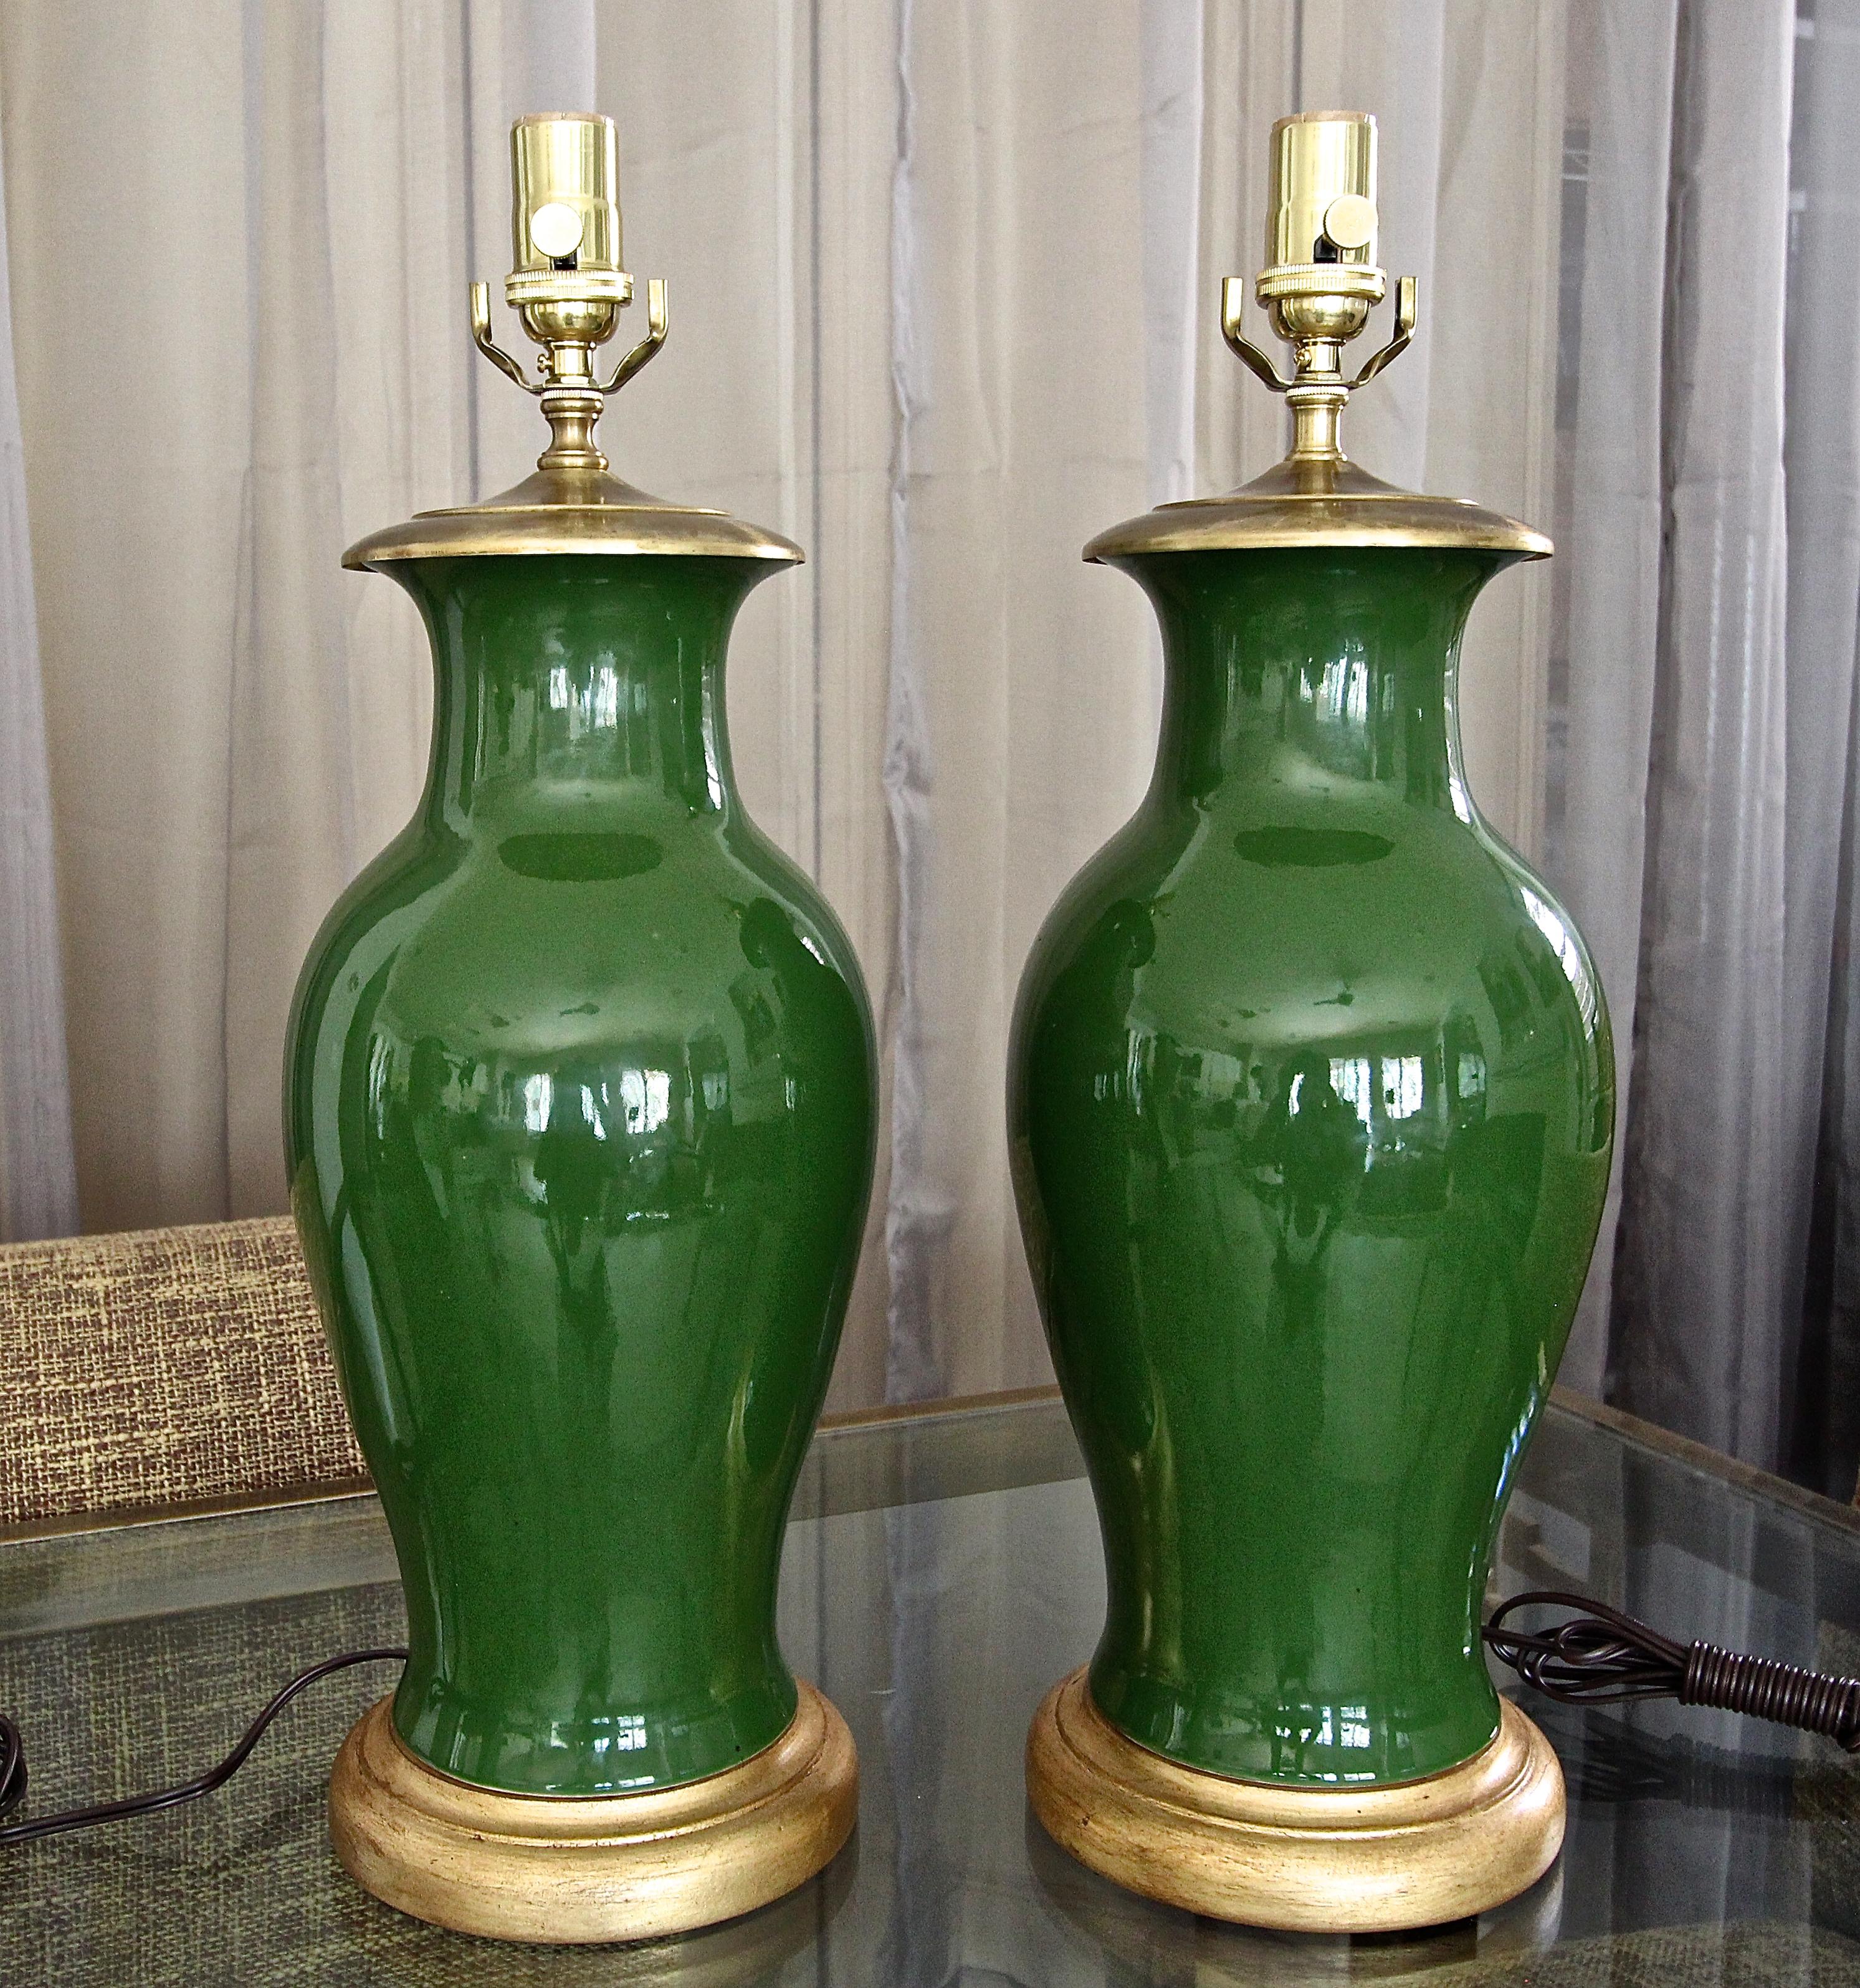 Pair of Chinese forest green porcelain baluster form vases mounted on gilt turned wood lamp bases. Newly wired with new 3 way brass sockets and cords. Vase portion is 14.5